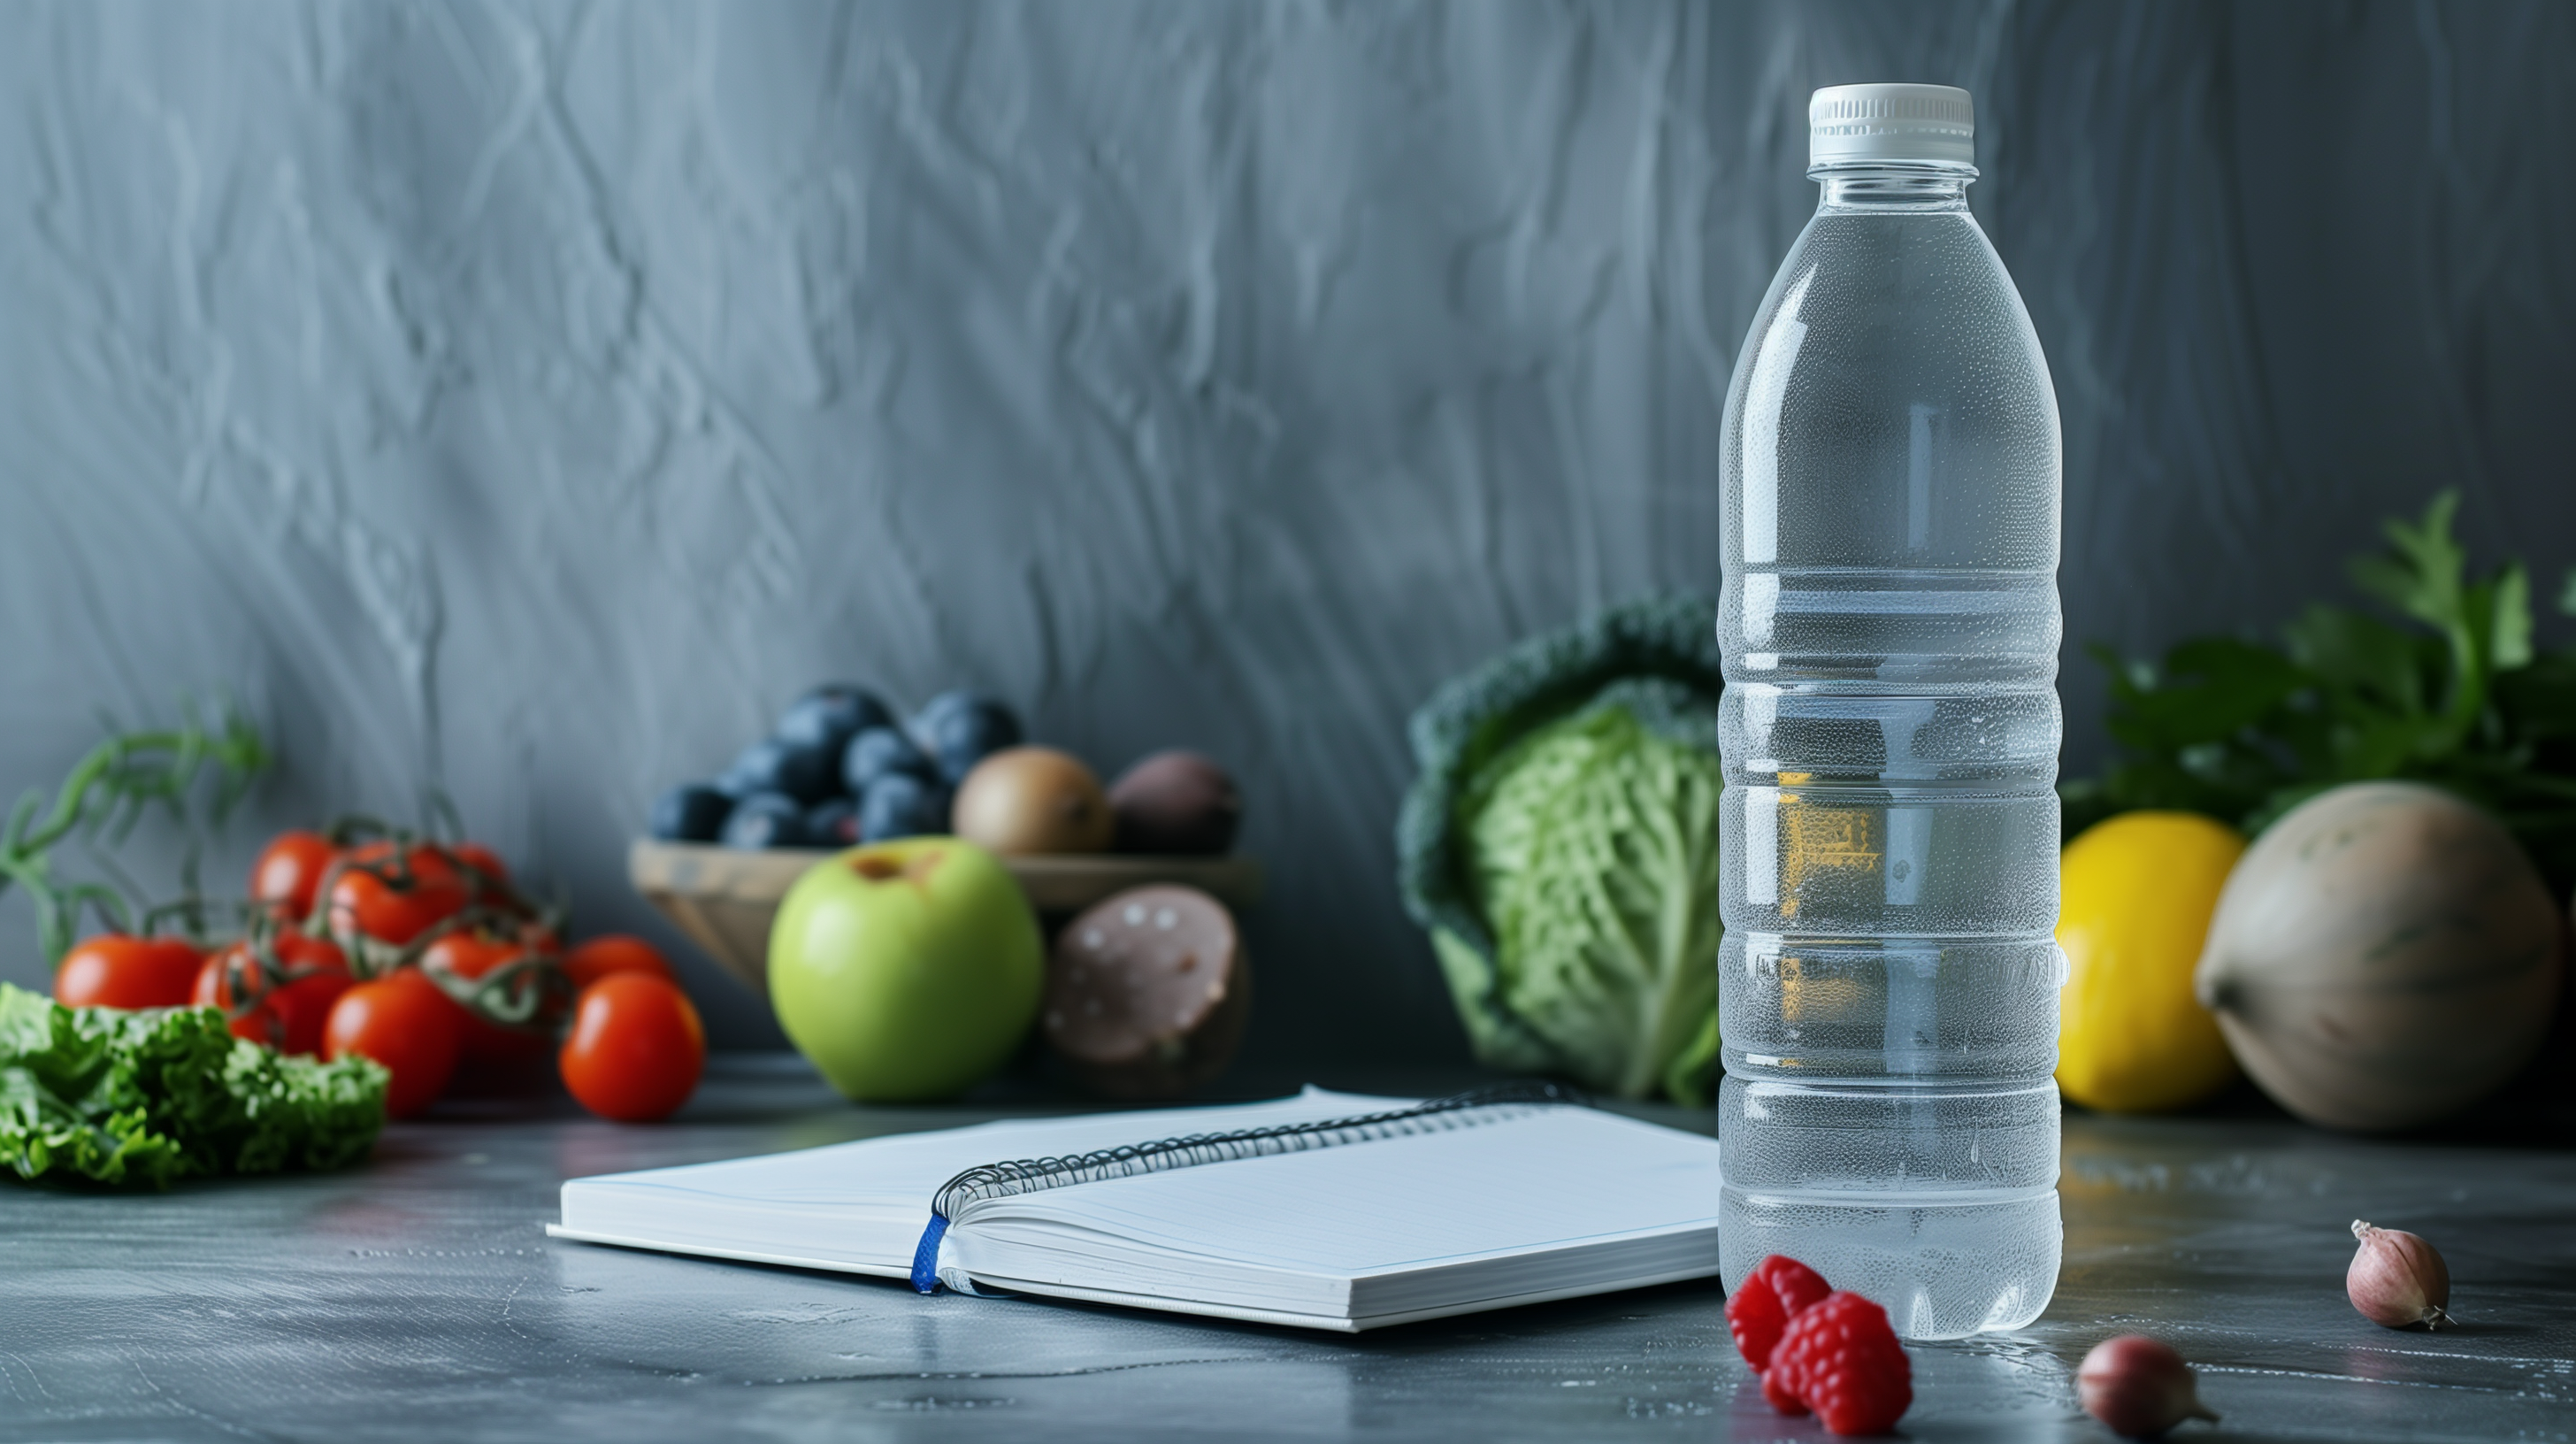 a plastic water bottle on a counter next to a notebook. fruits and veggies are also scatted on the counter to take fi